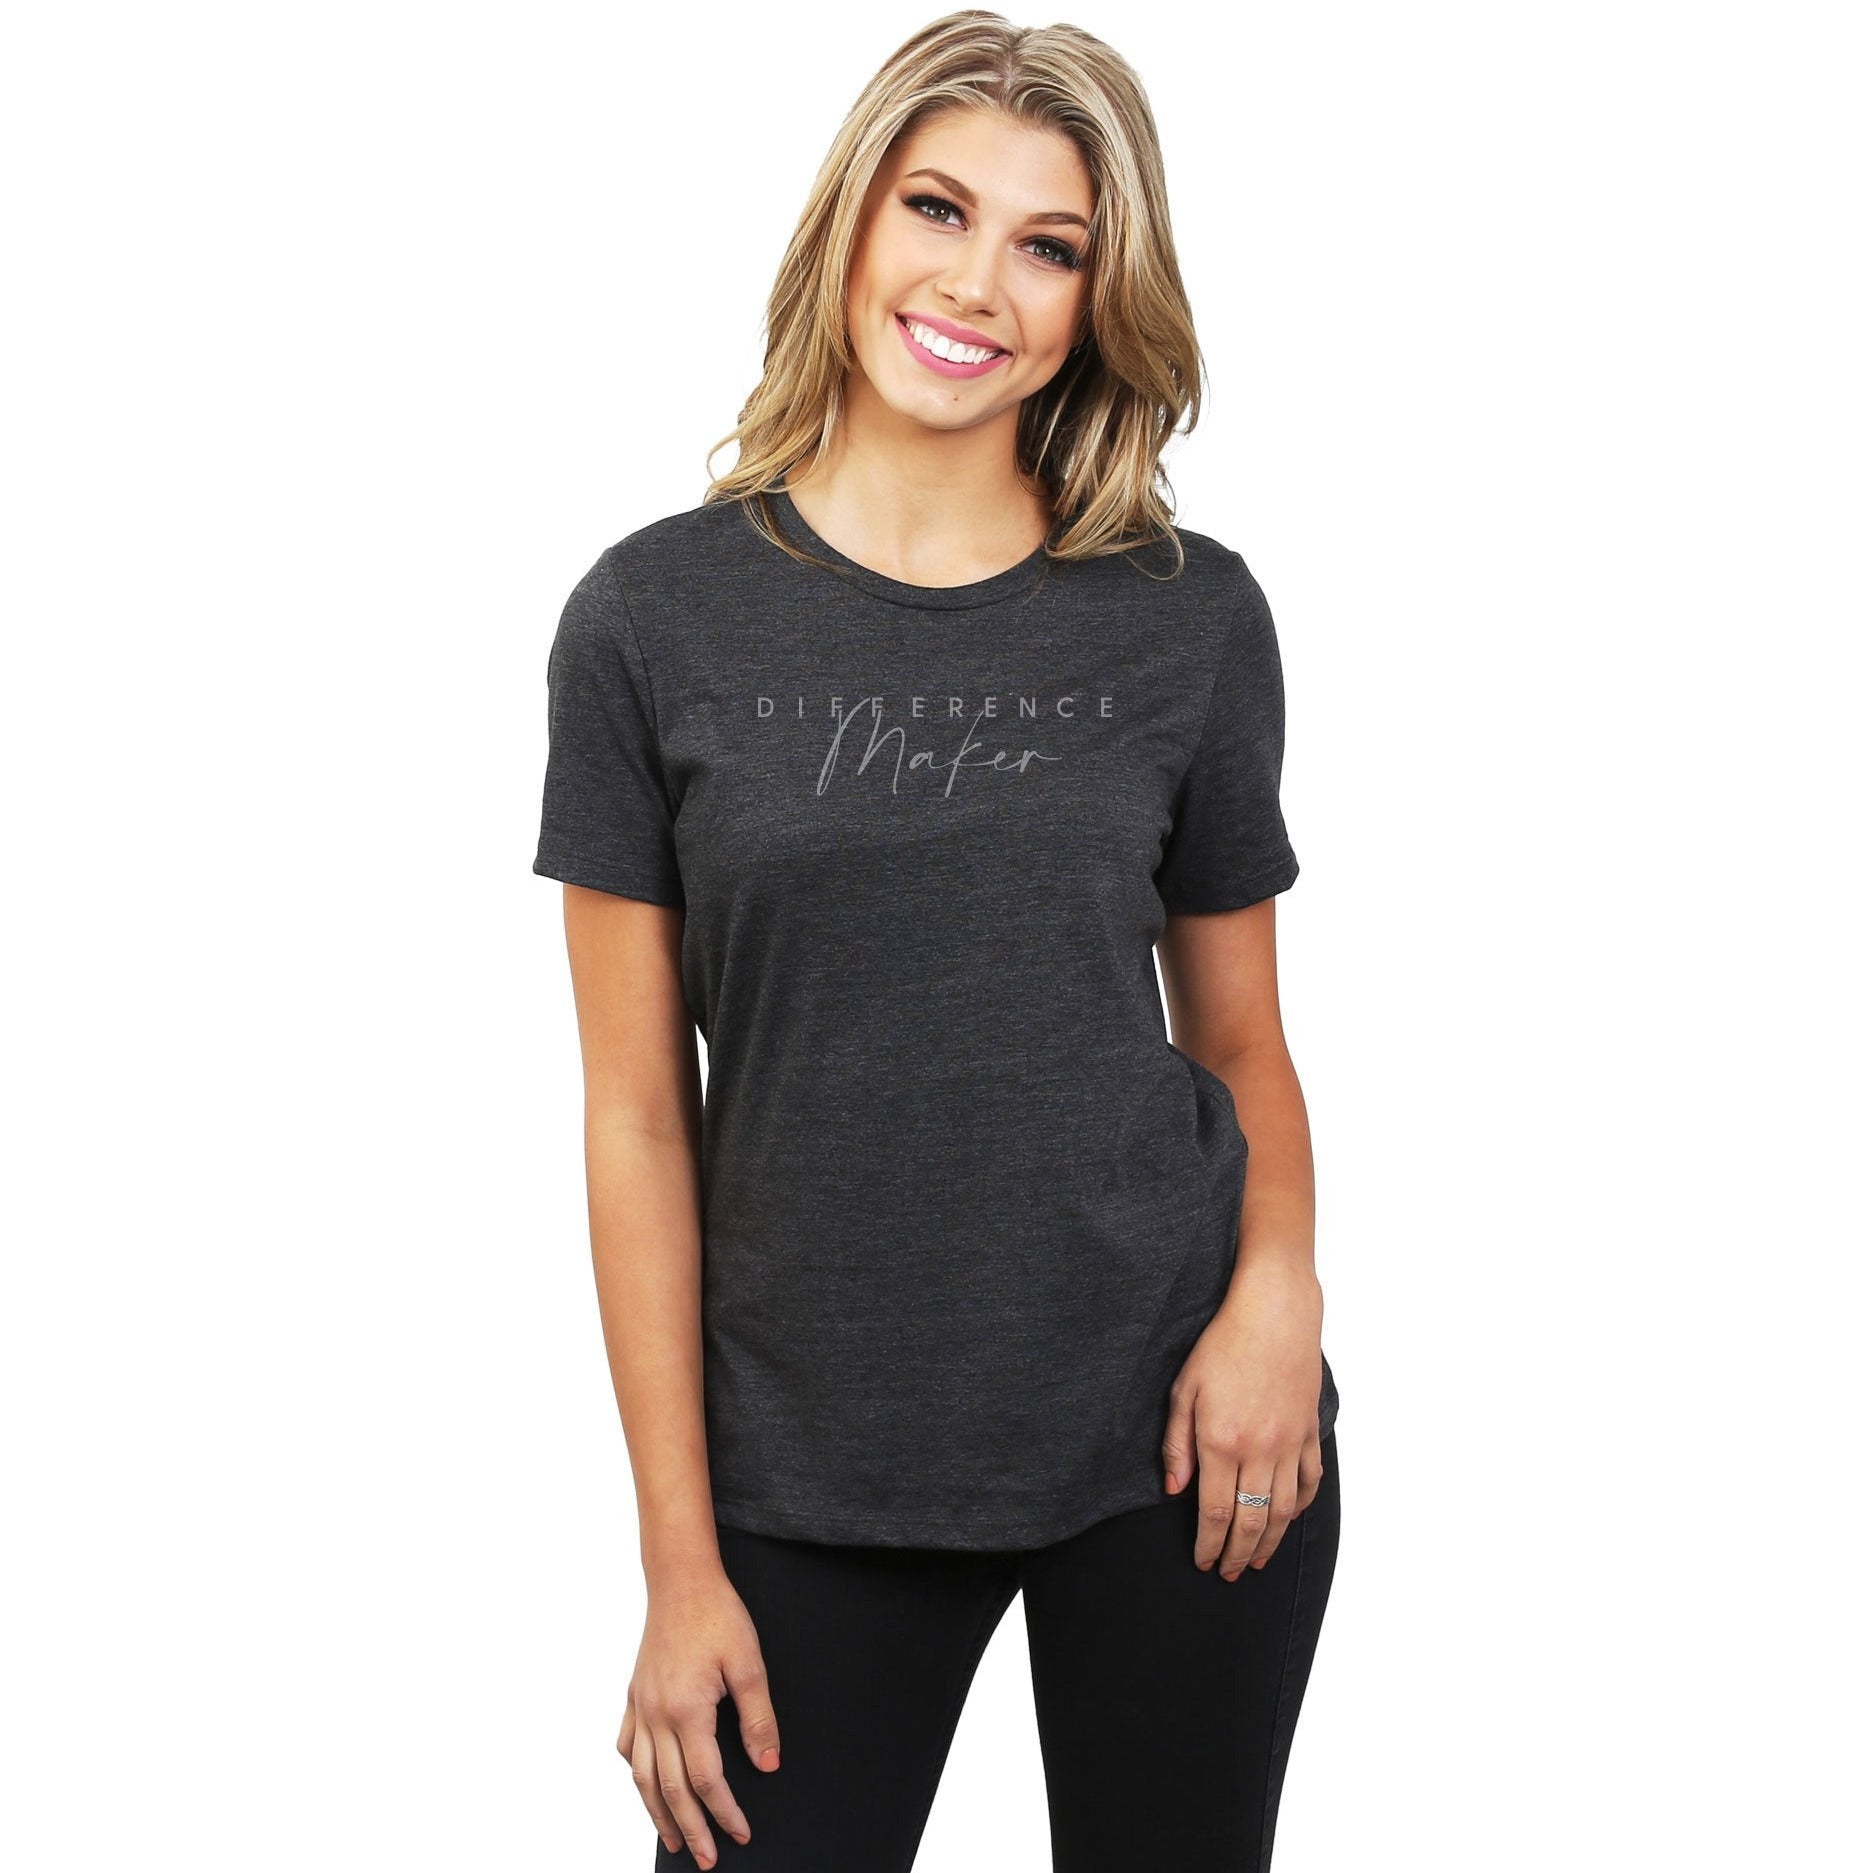 Difference Maker Women's Relaxed Crewneck T-Shirt Top Tee Charcoal Model
